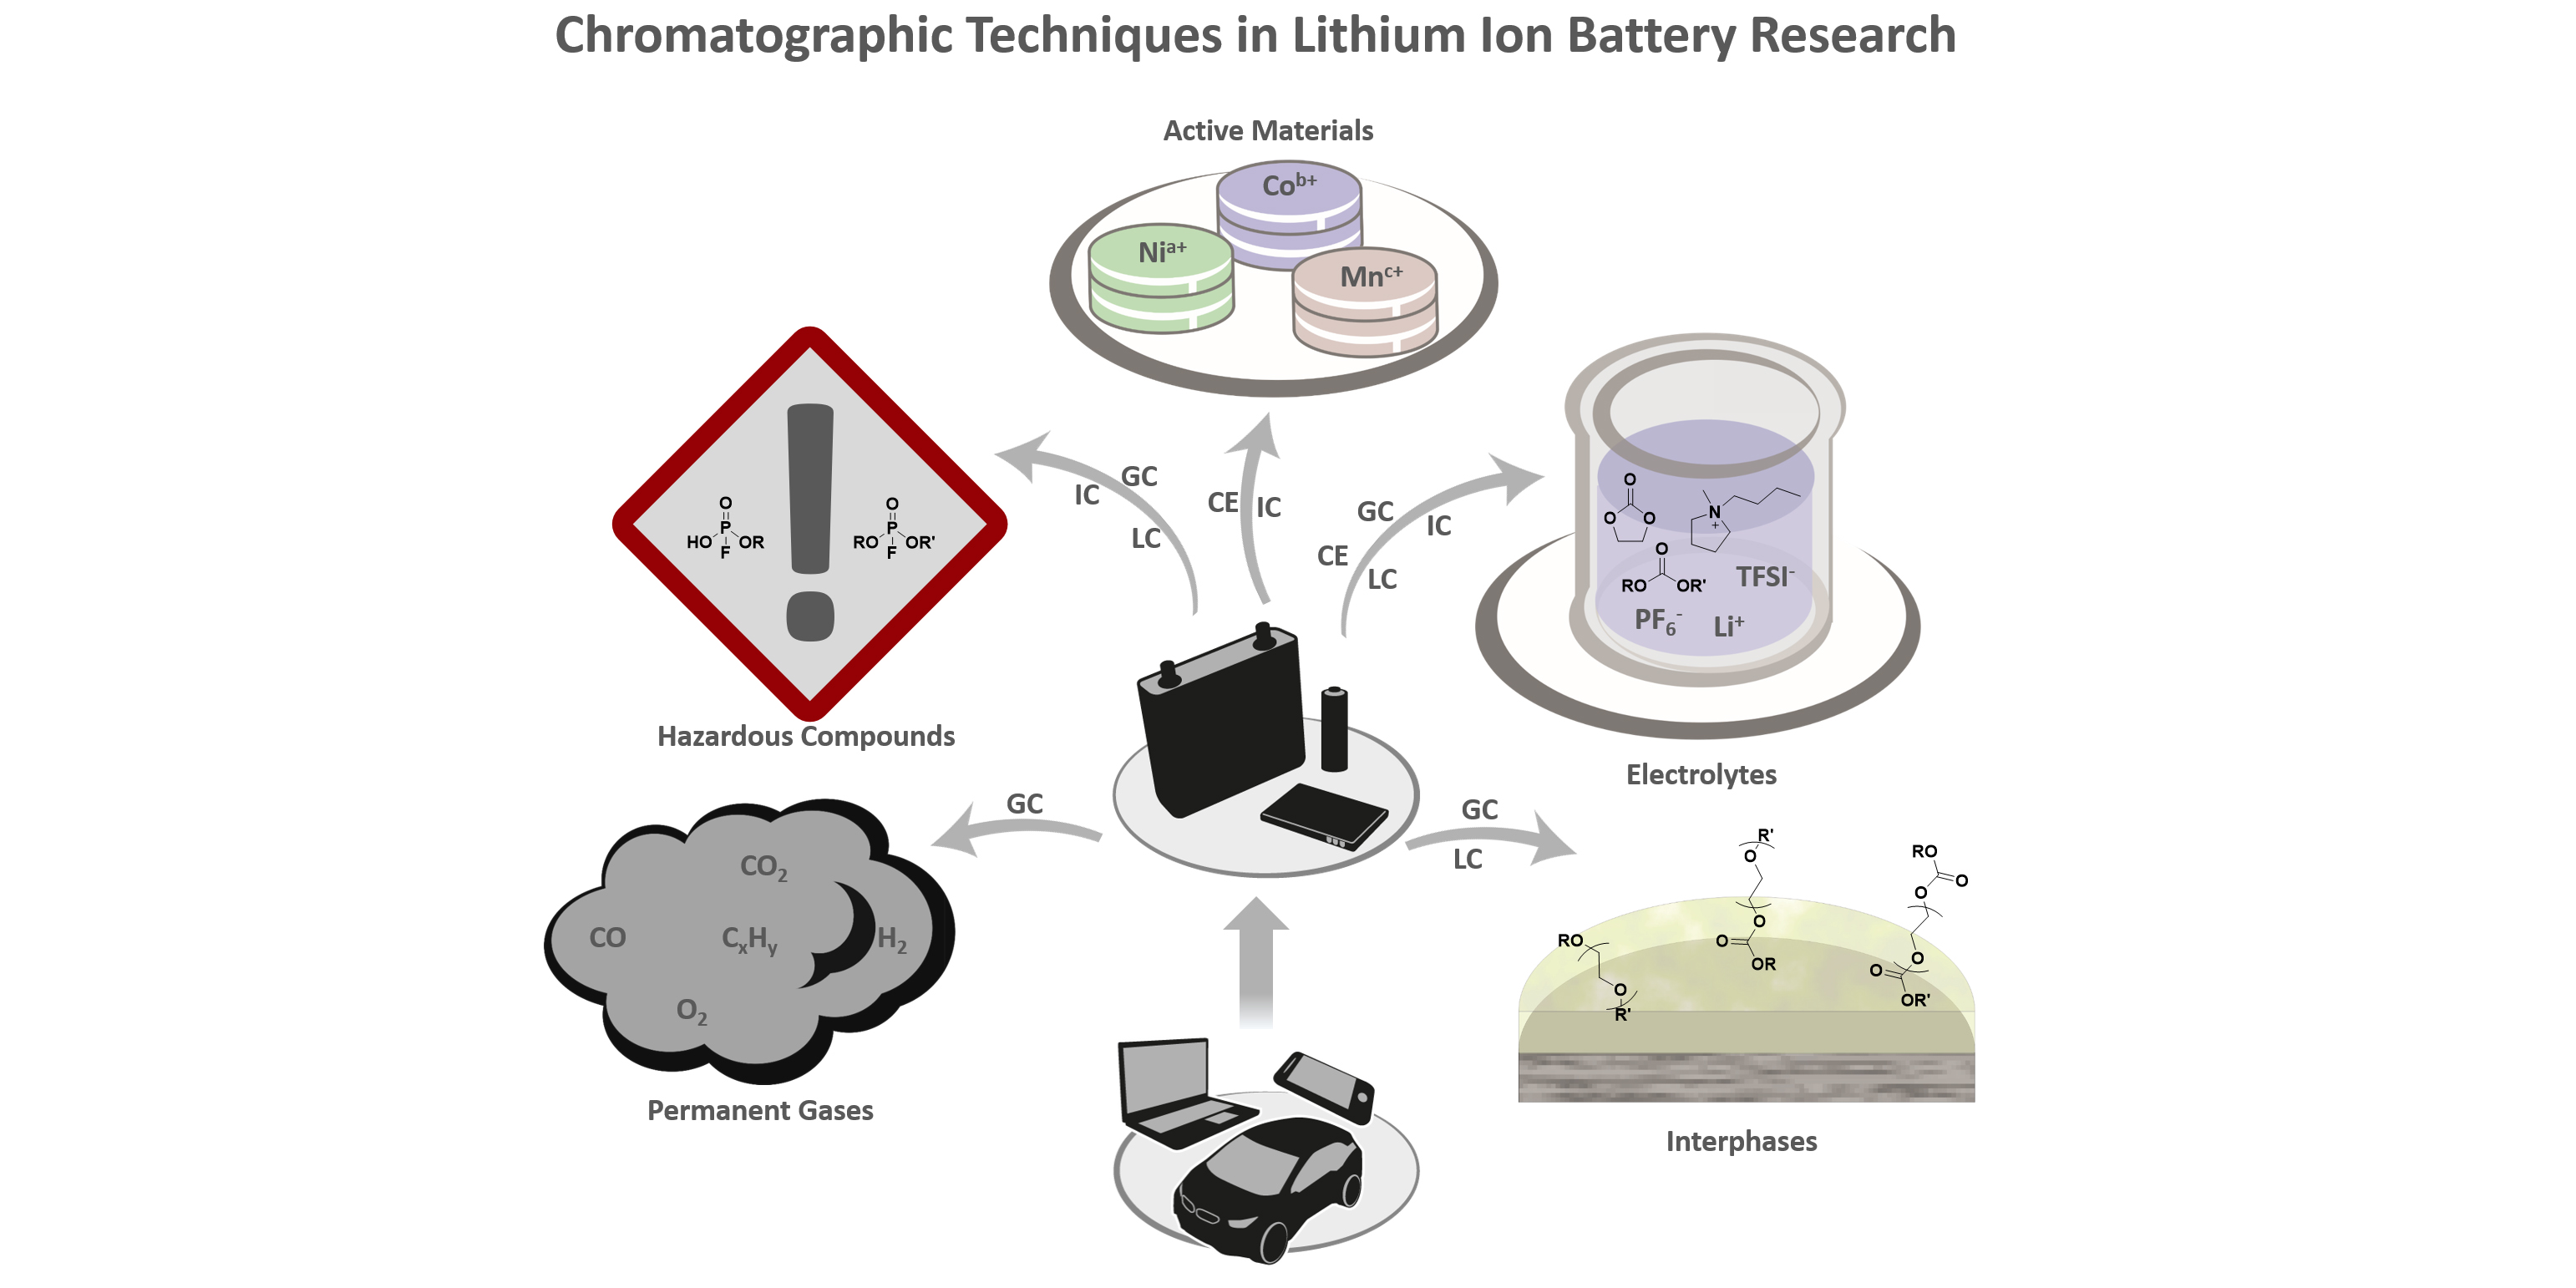 hromatographic methods in lithium ion battery research